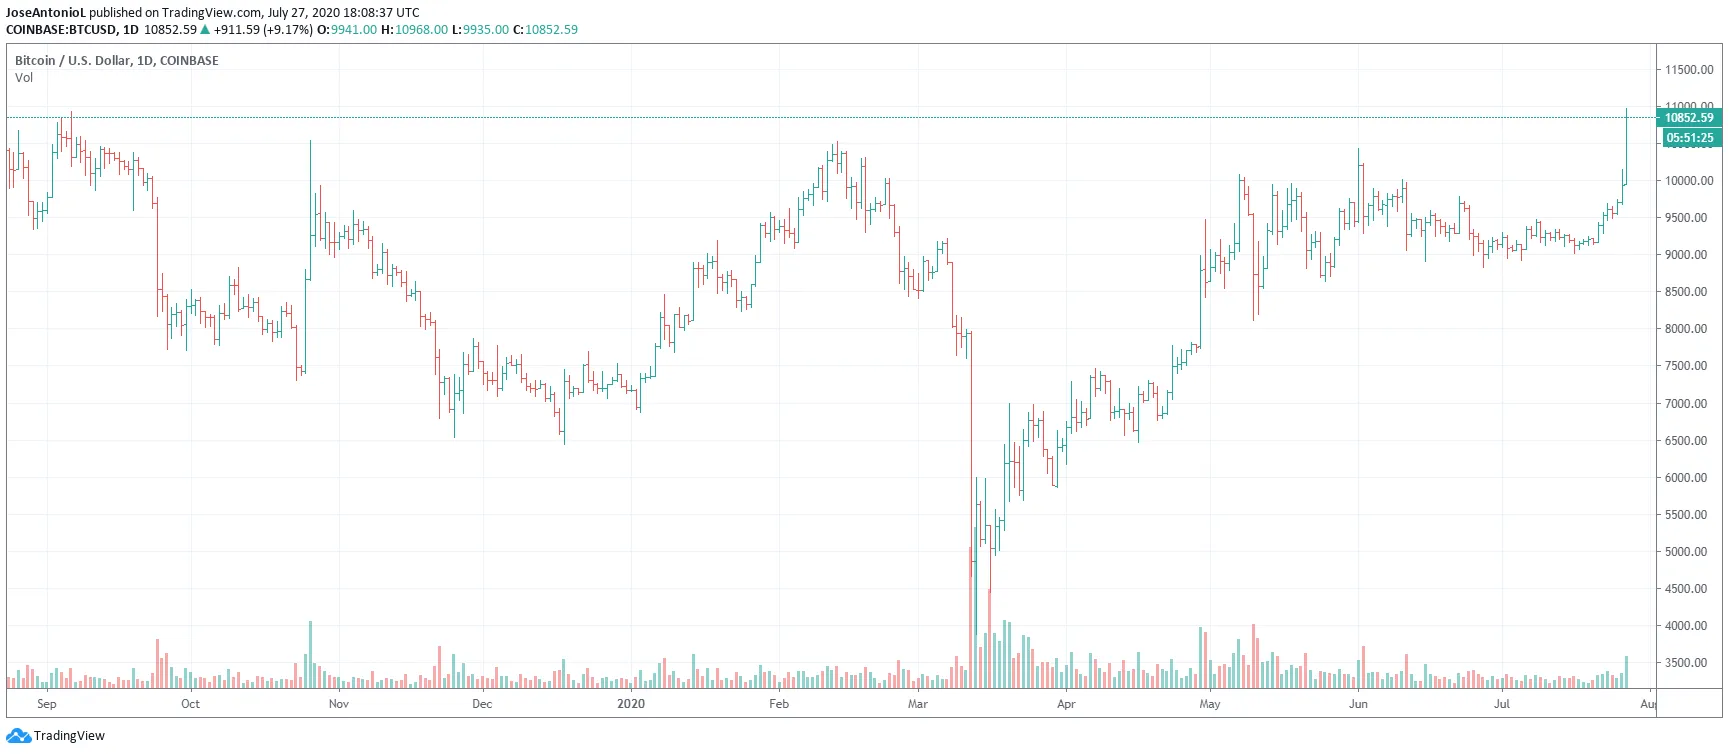 Bitcoin price against the US dollar. Image: TradingView